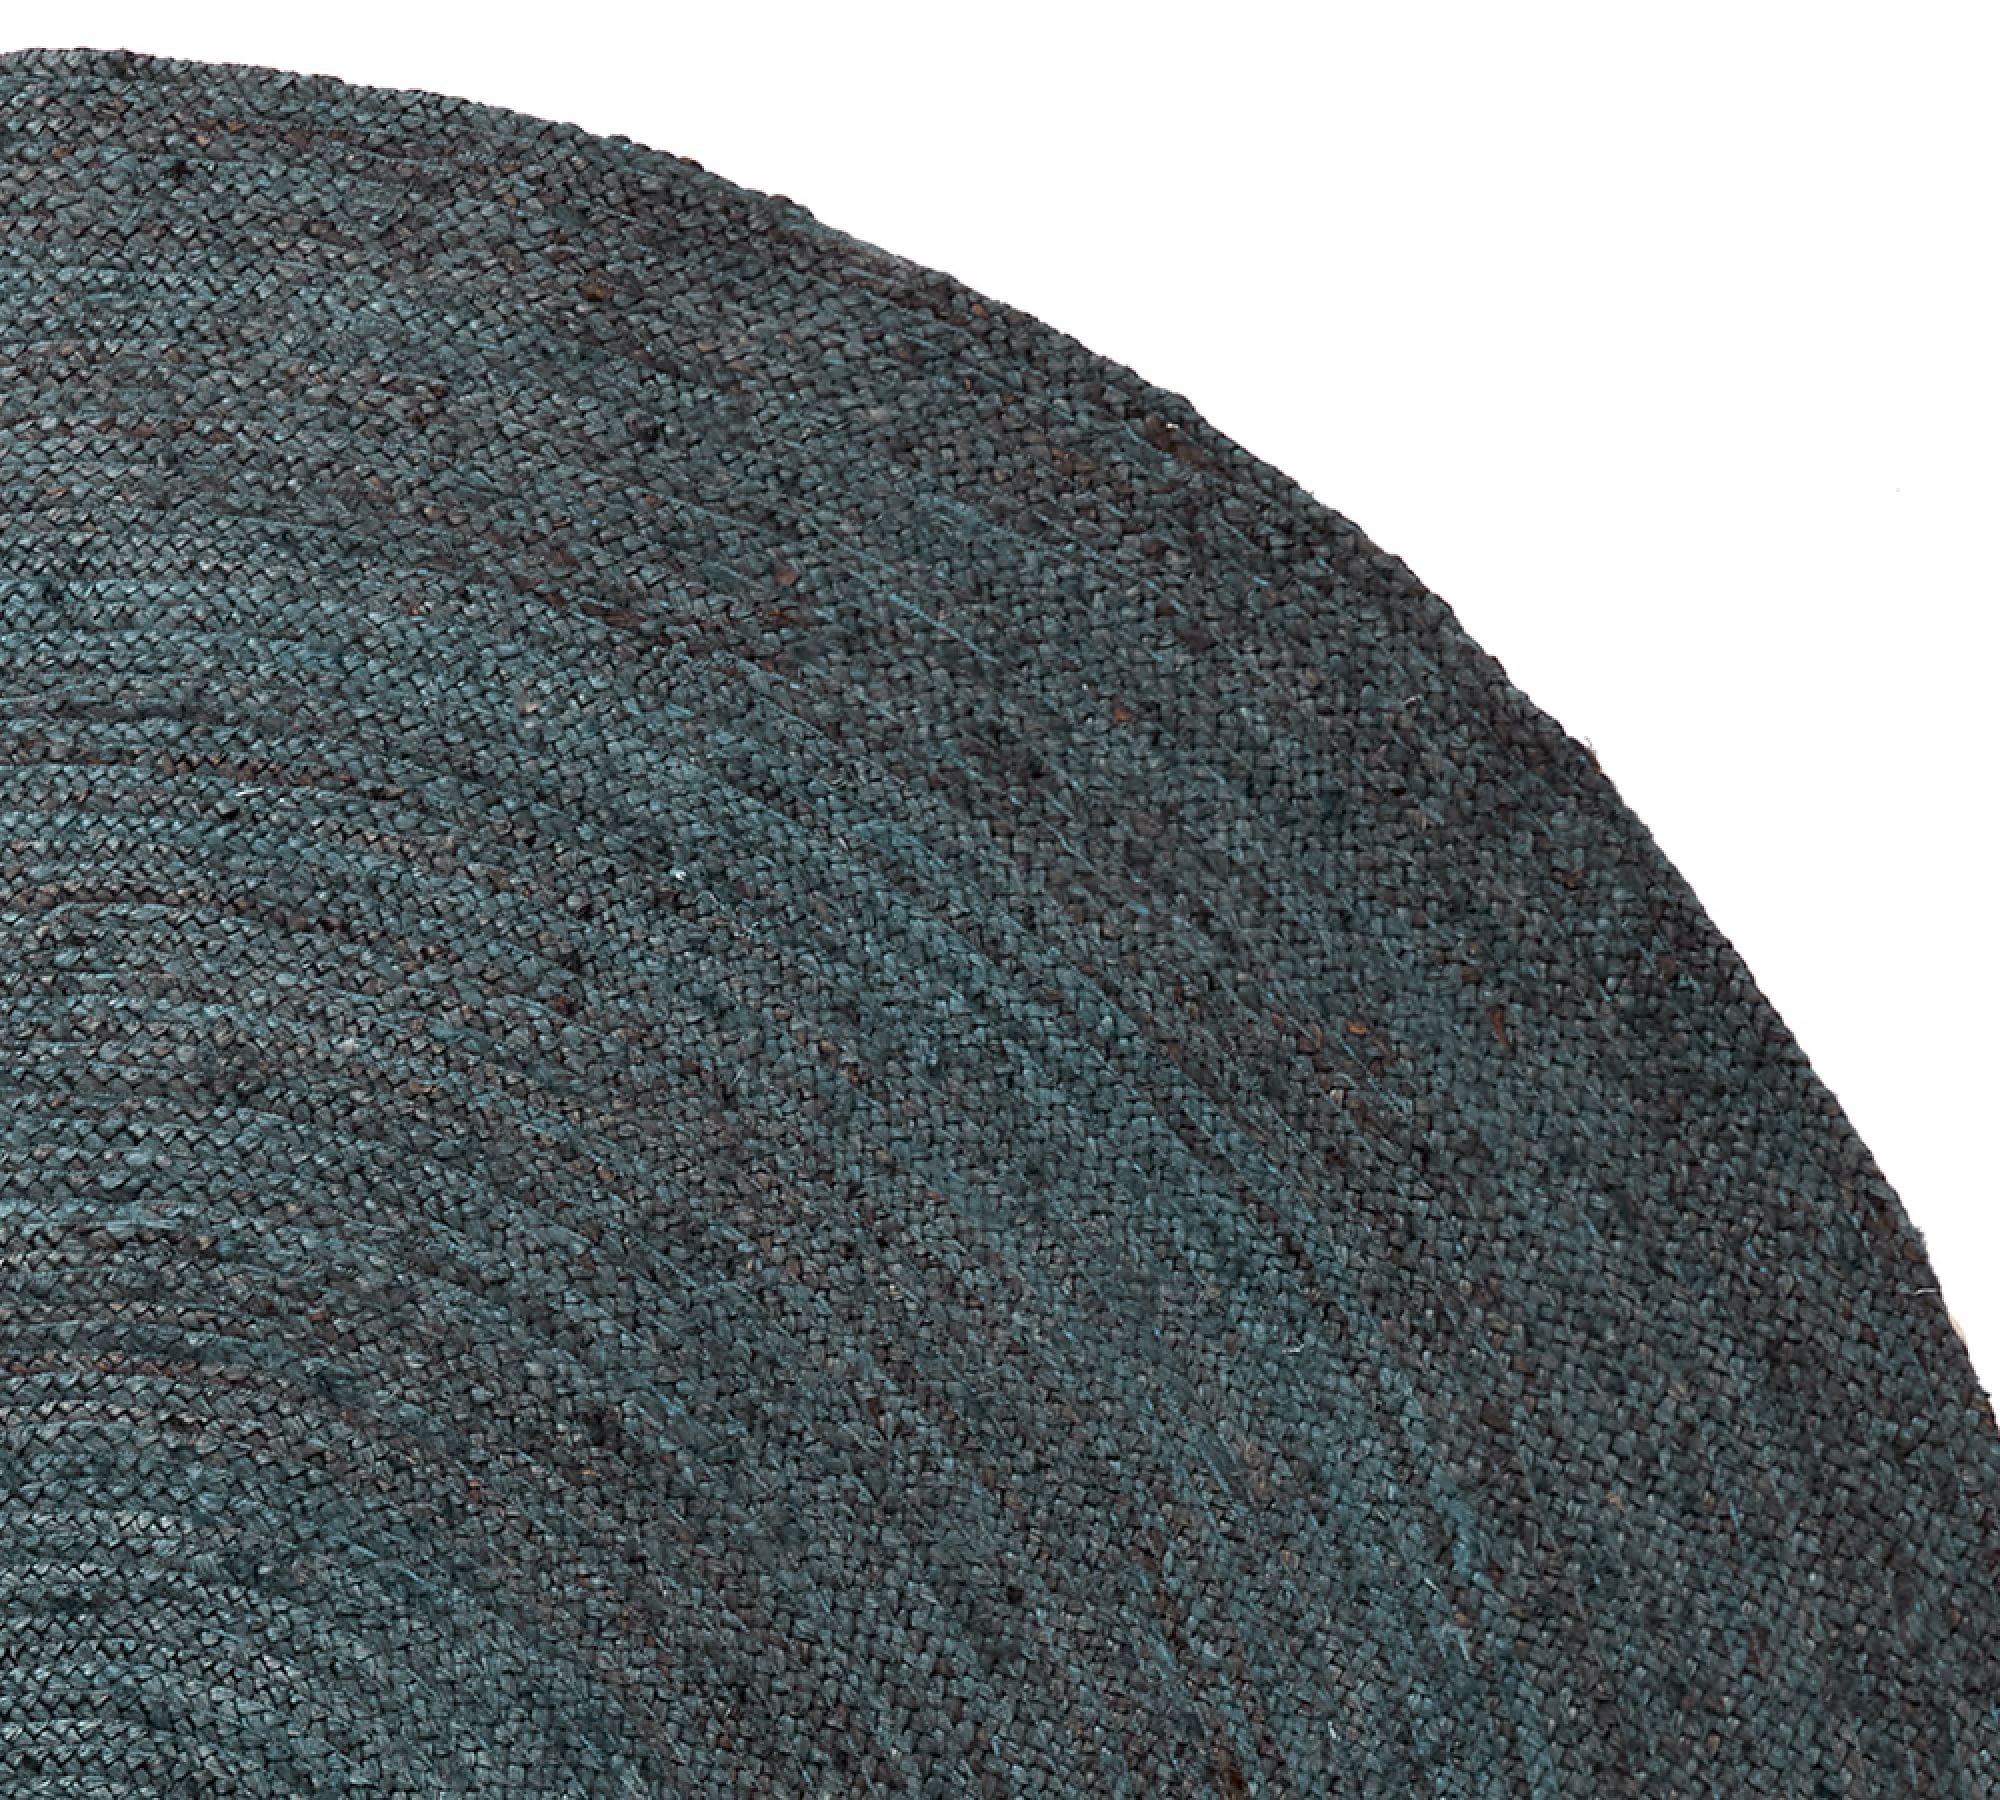 Haven Braided Rug Swatch - Free Returns Within 30 Days